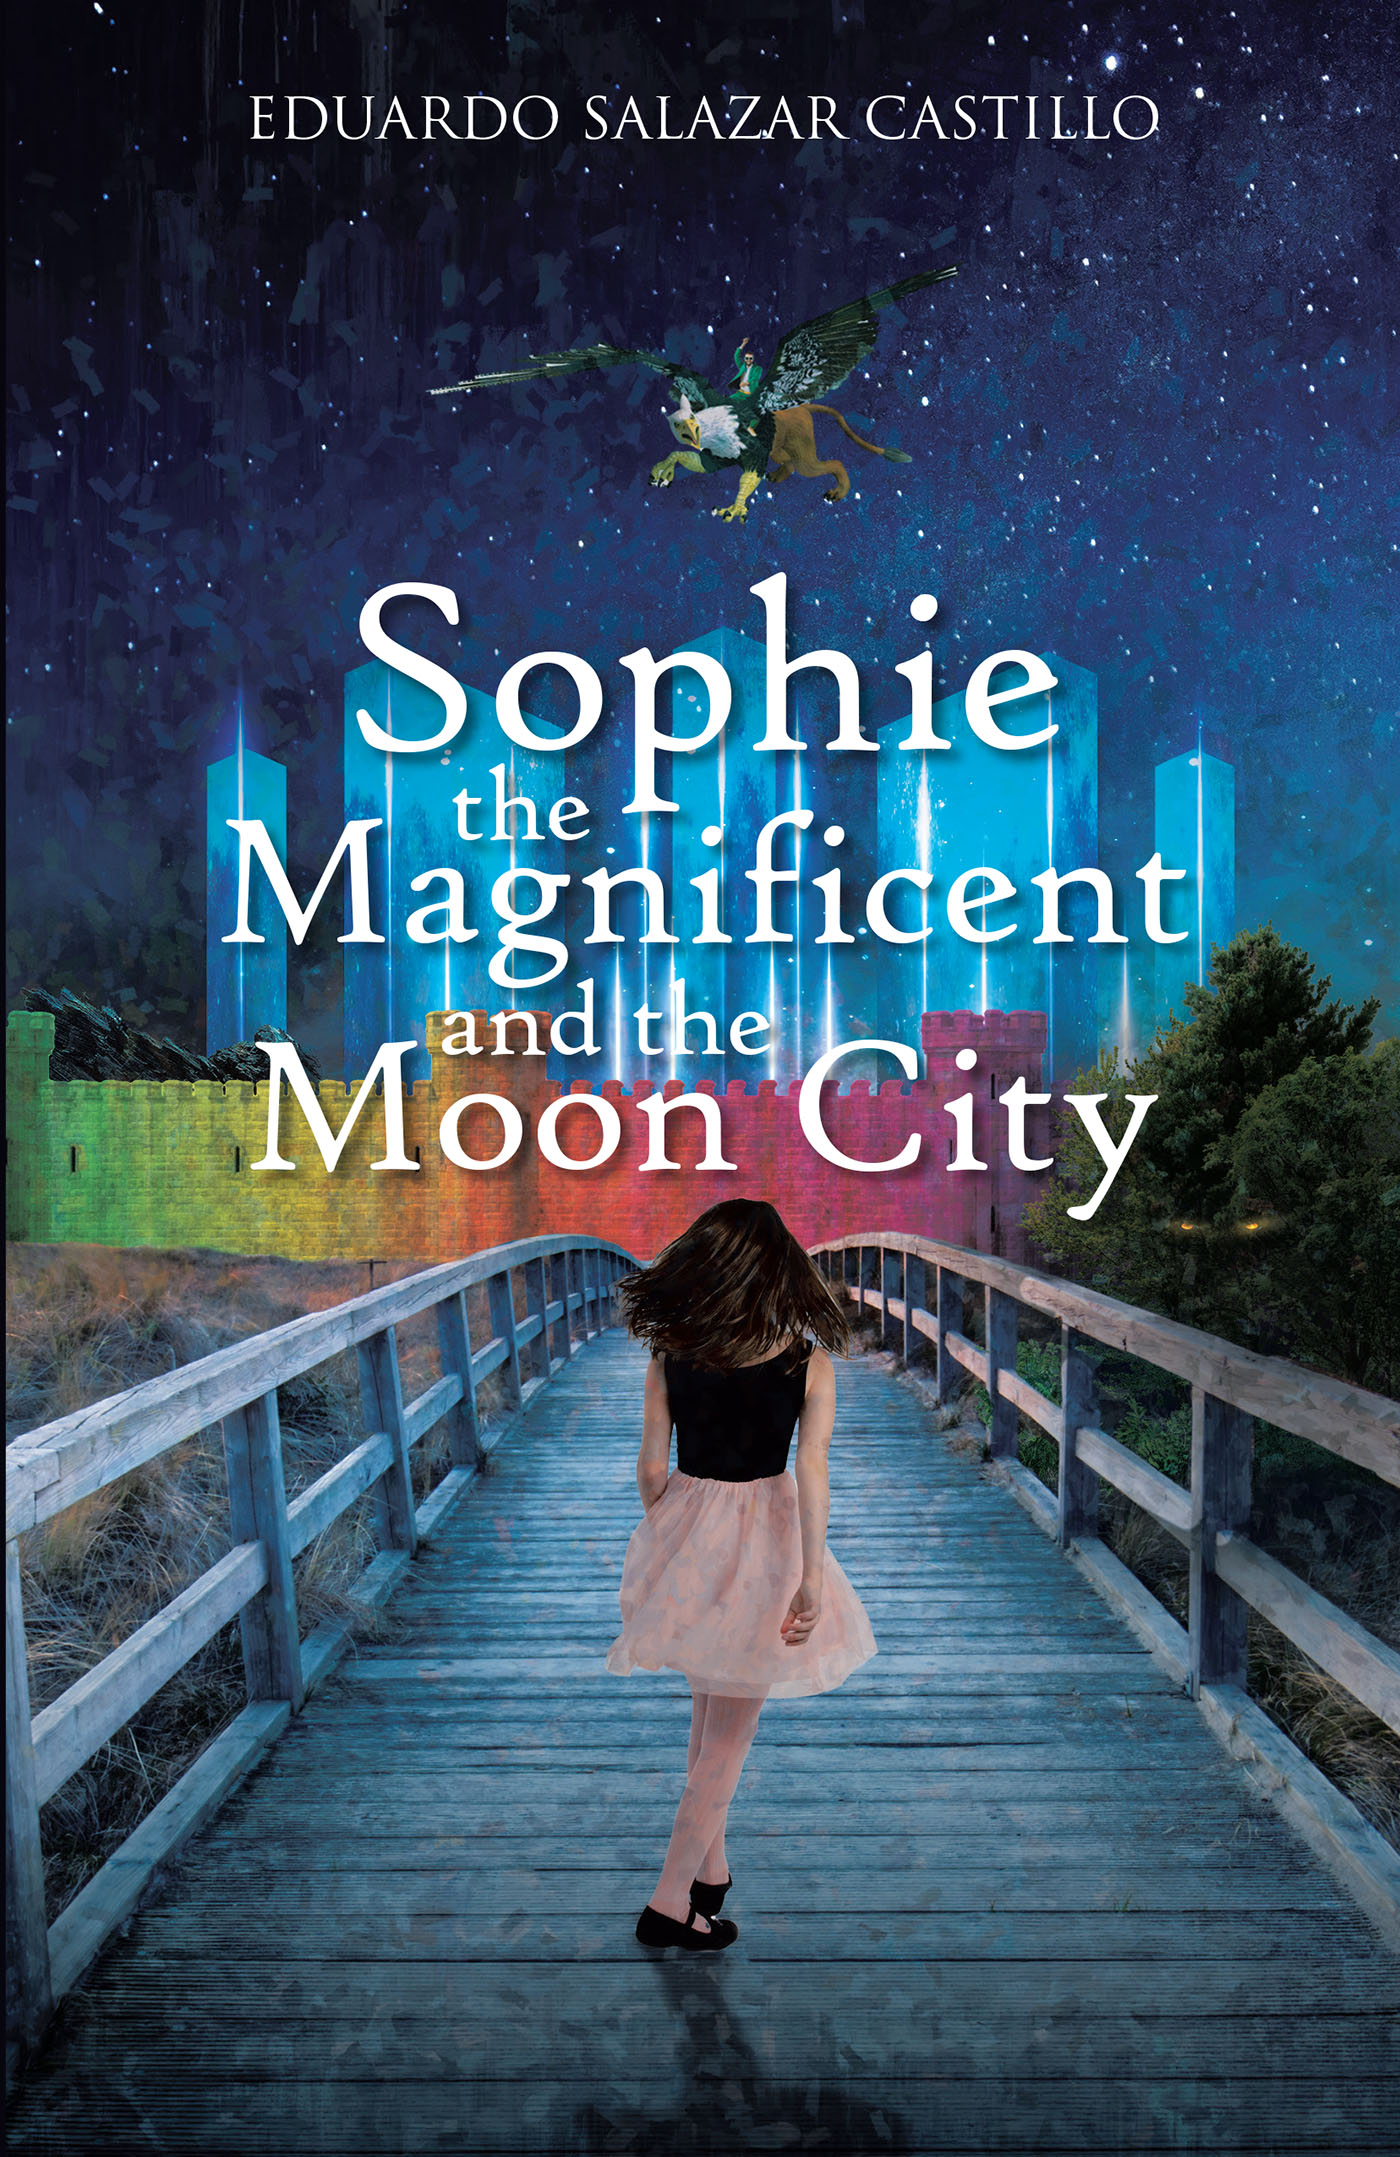 Eduardo Salazar Castillo’s Newly Released "Sophie the Magnificent and the Moon City" is an Imaginative Tale of Adventure and Wonder